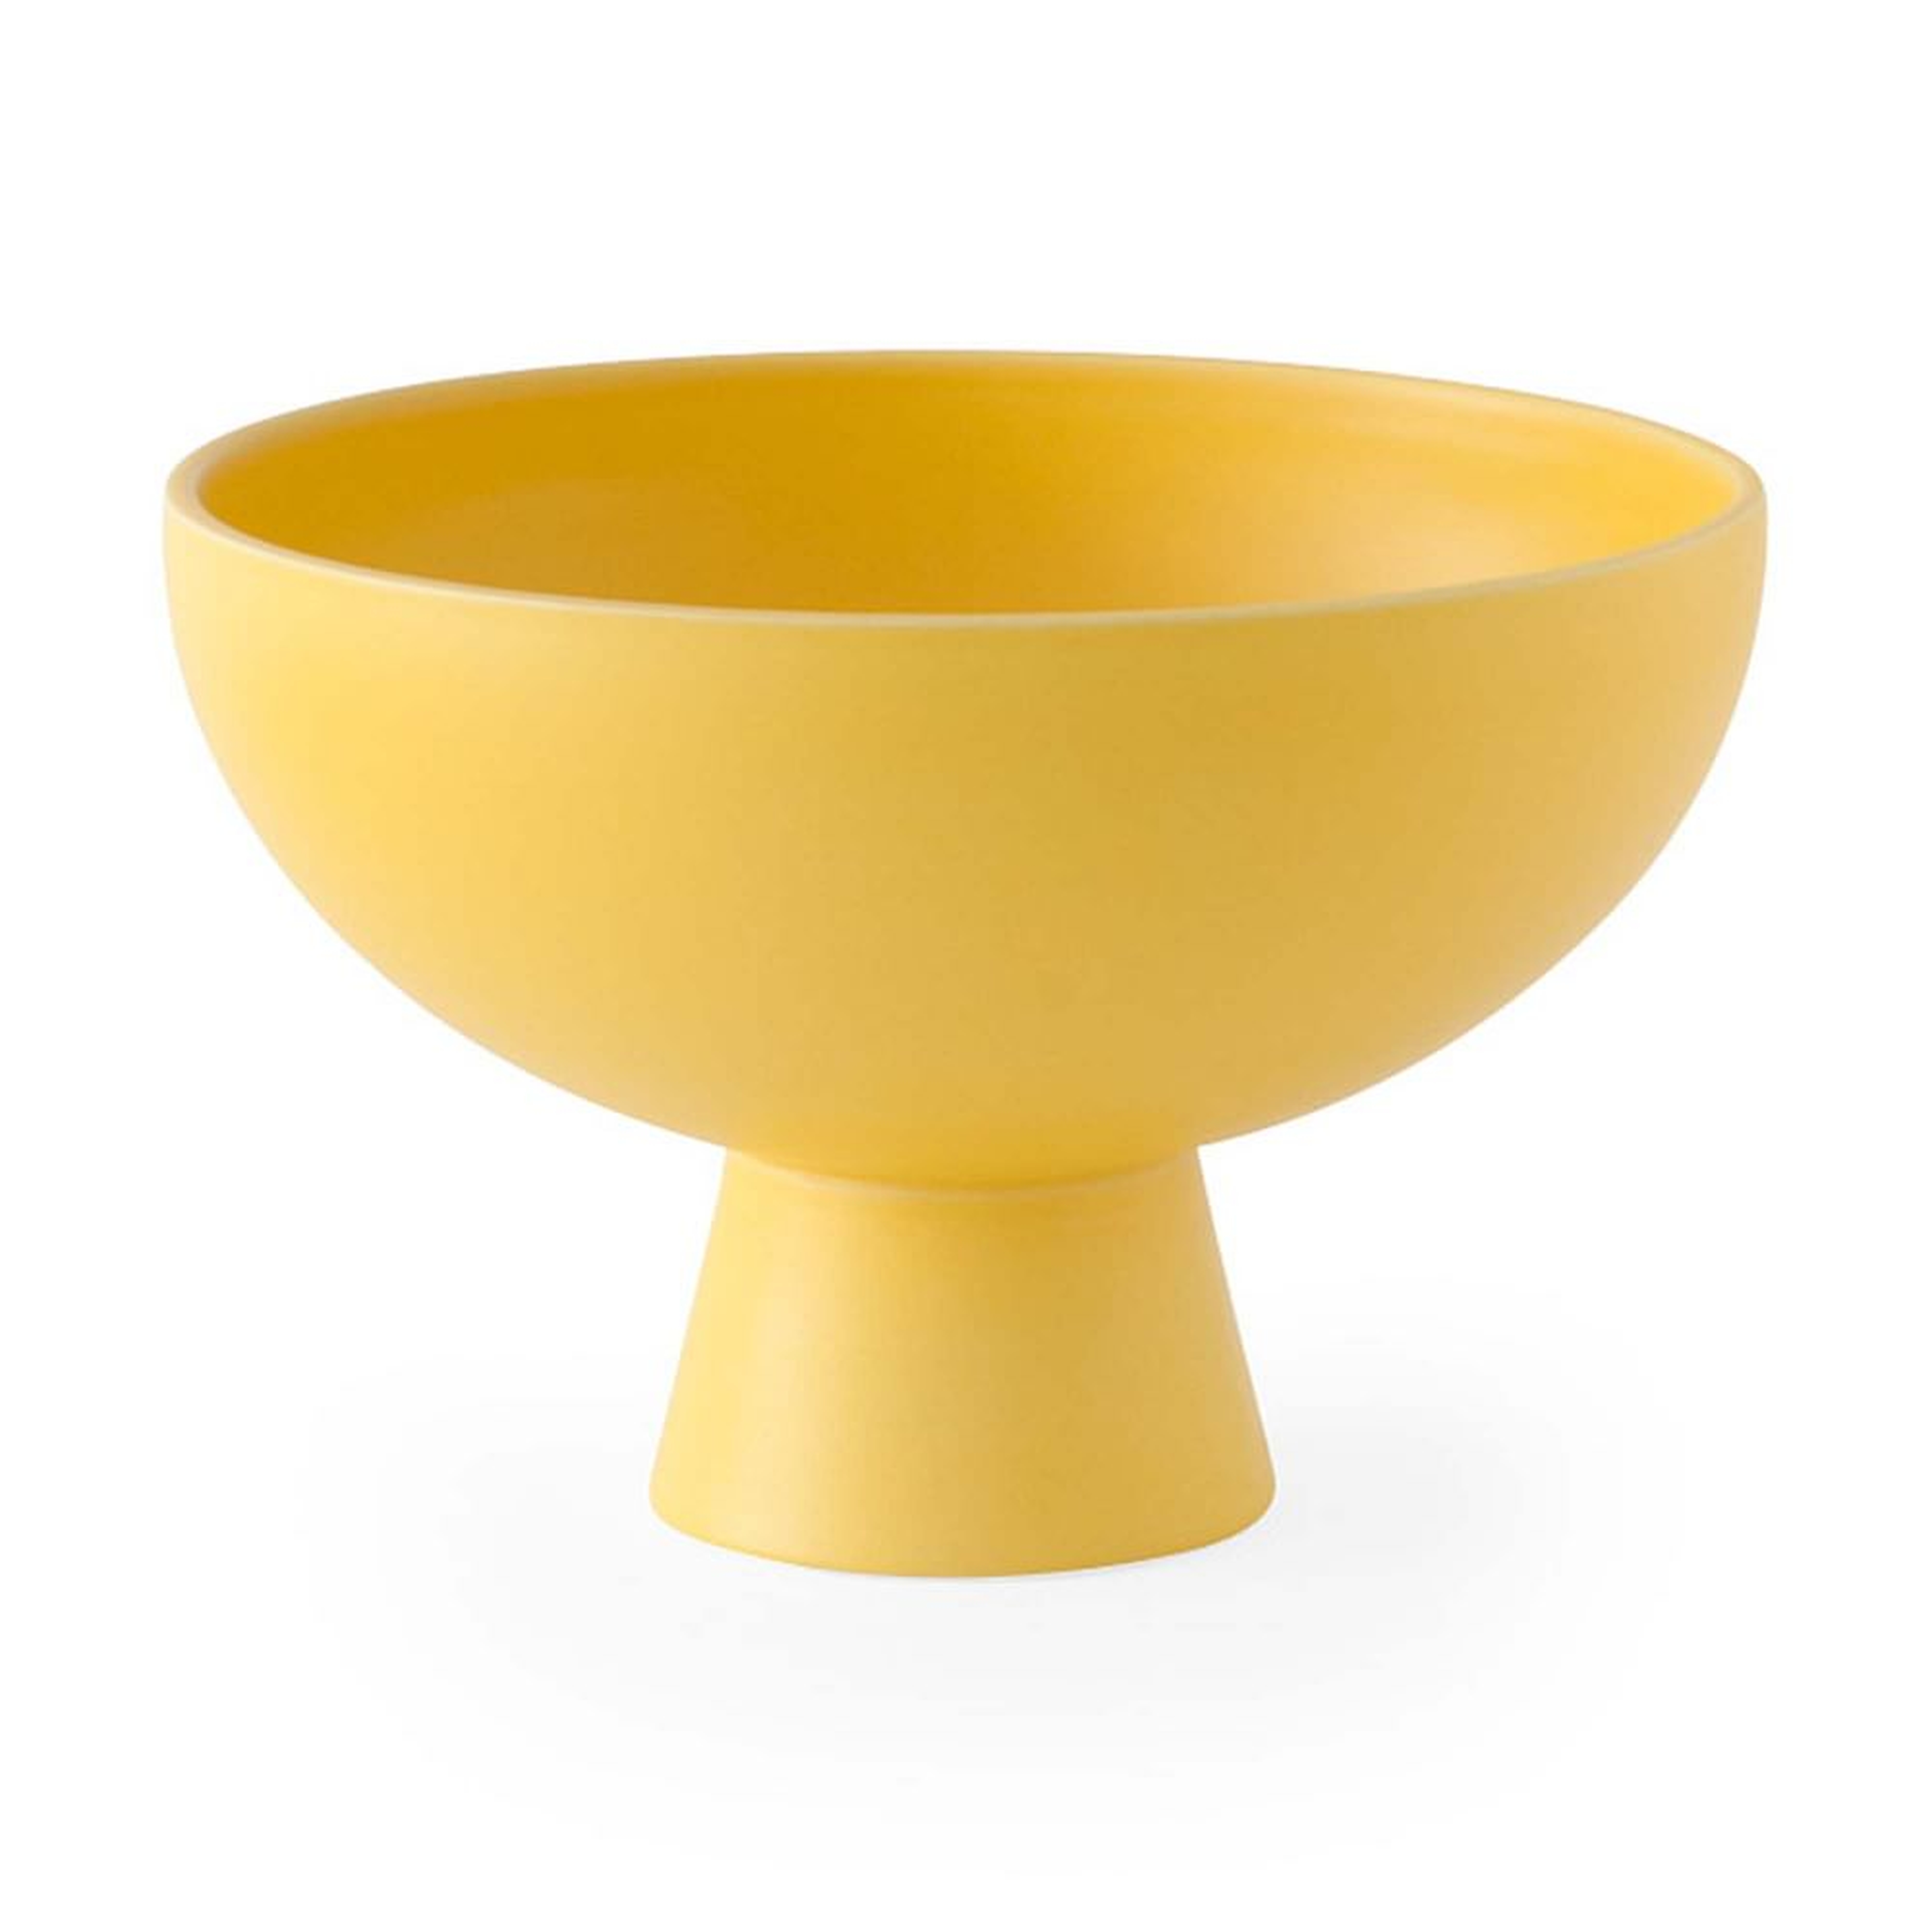 MoMA Collection Raawii Strom Bowl Small, Ceramic, Freesia Yellow - West Elm